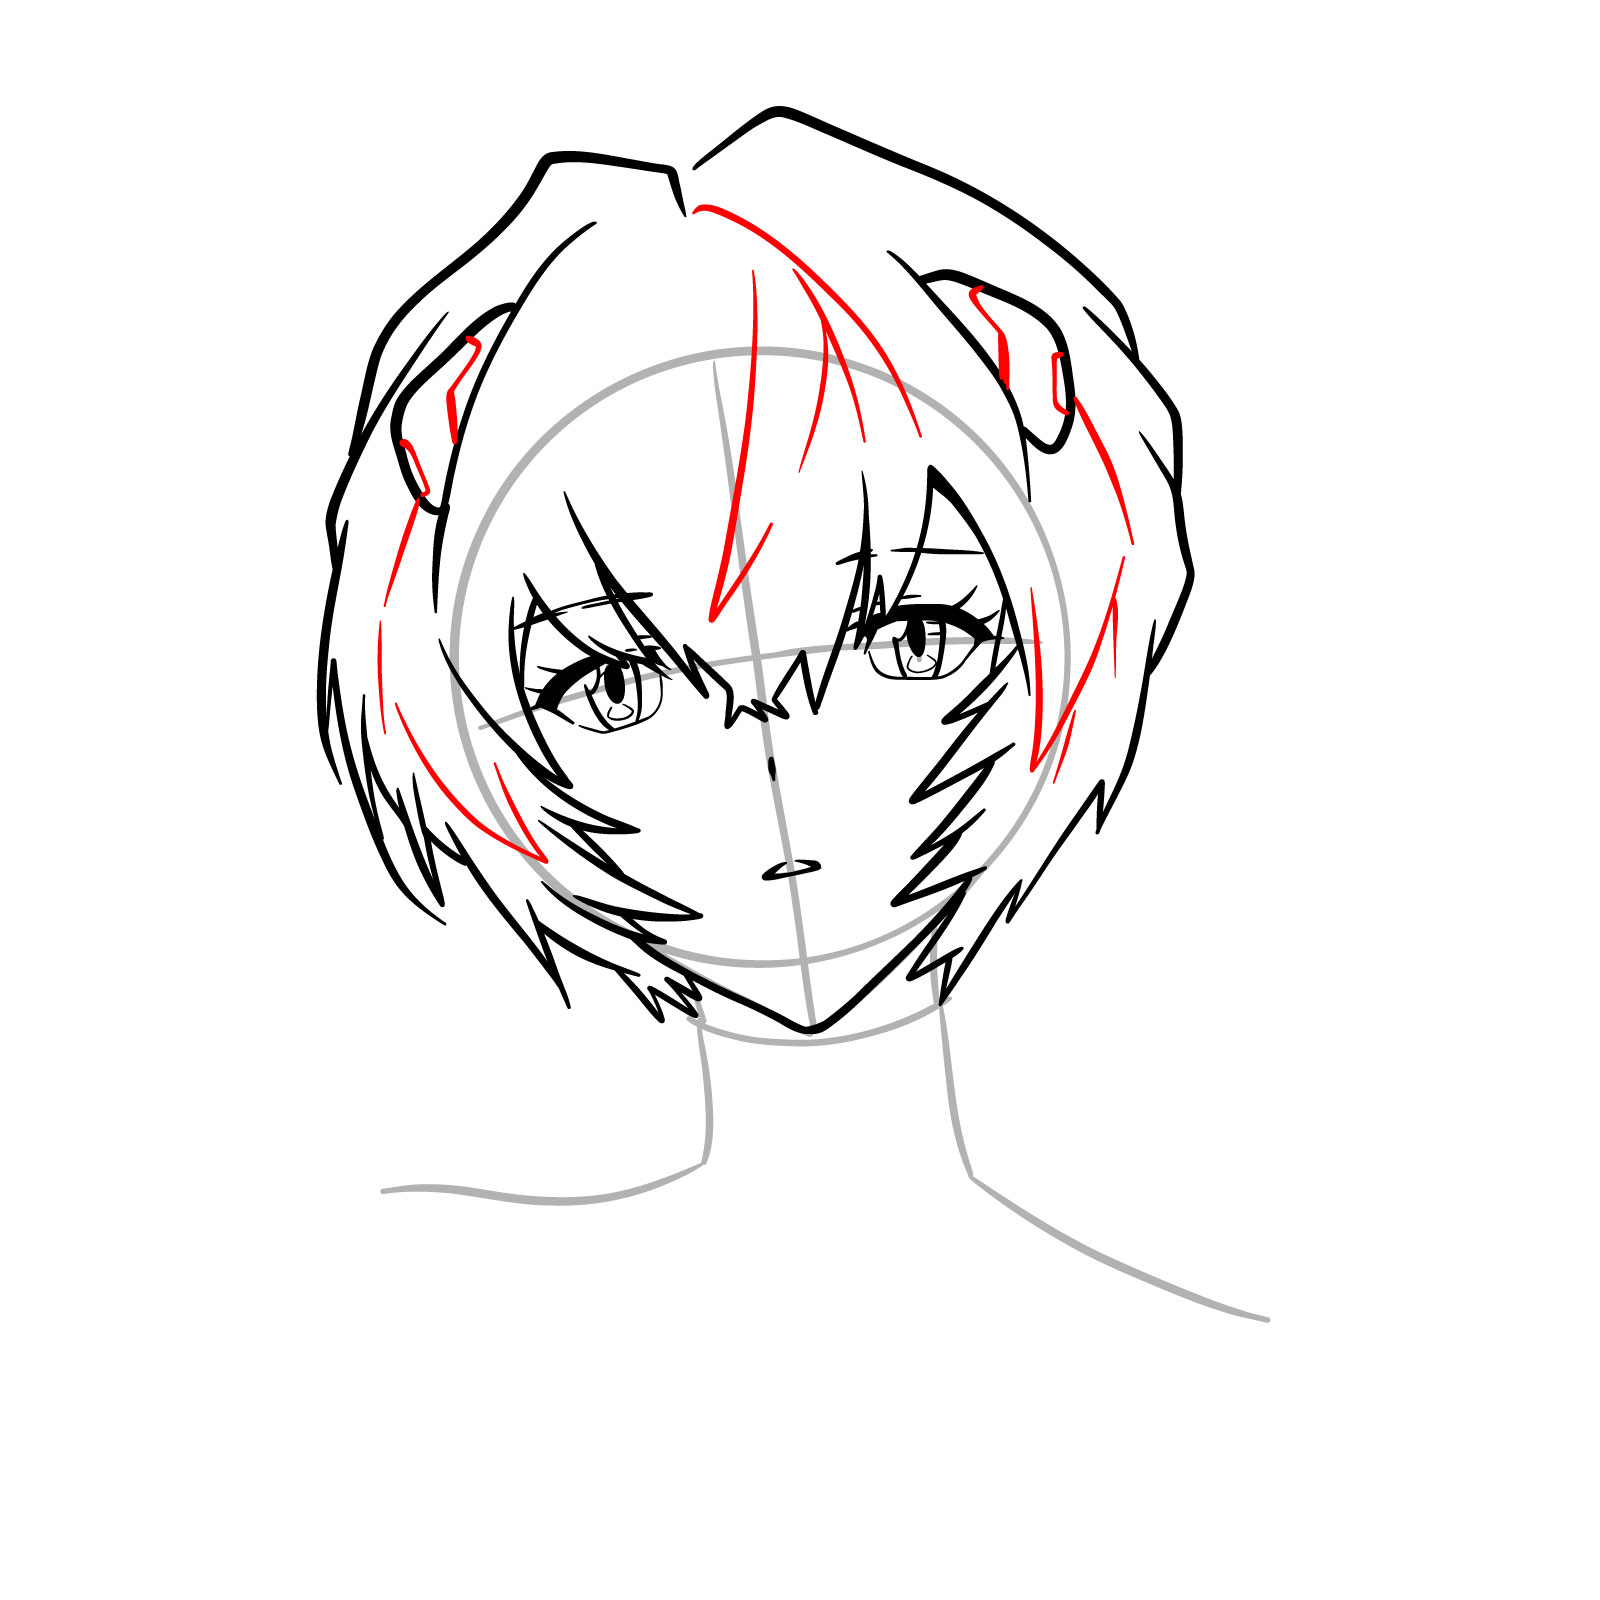 How to draw Rei Ayanami's face - Evangelion - step 15